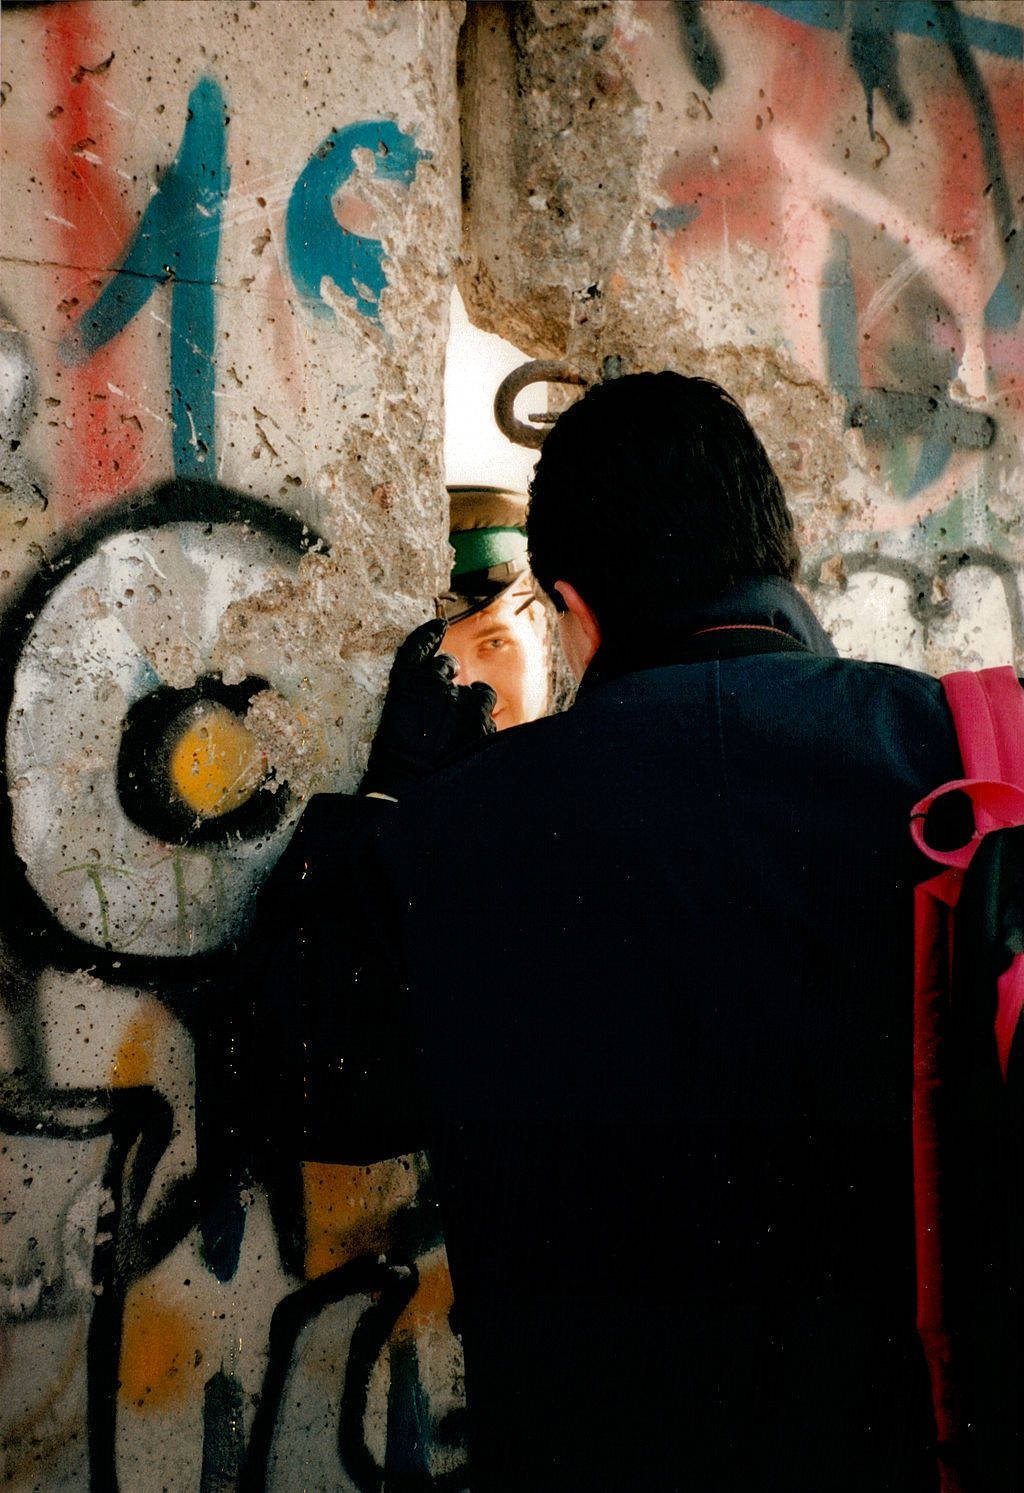 Through a large gap in a spray-painted section of the concrete Berlin Wall, a West German man with a black coat and gloves and a red backpack speaks to a uniformed East German guard wearing a khaki military cap.